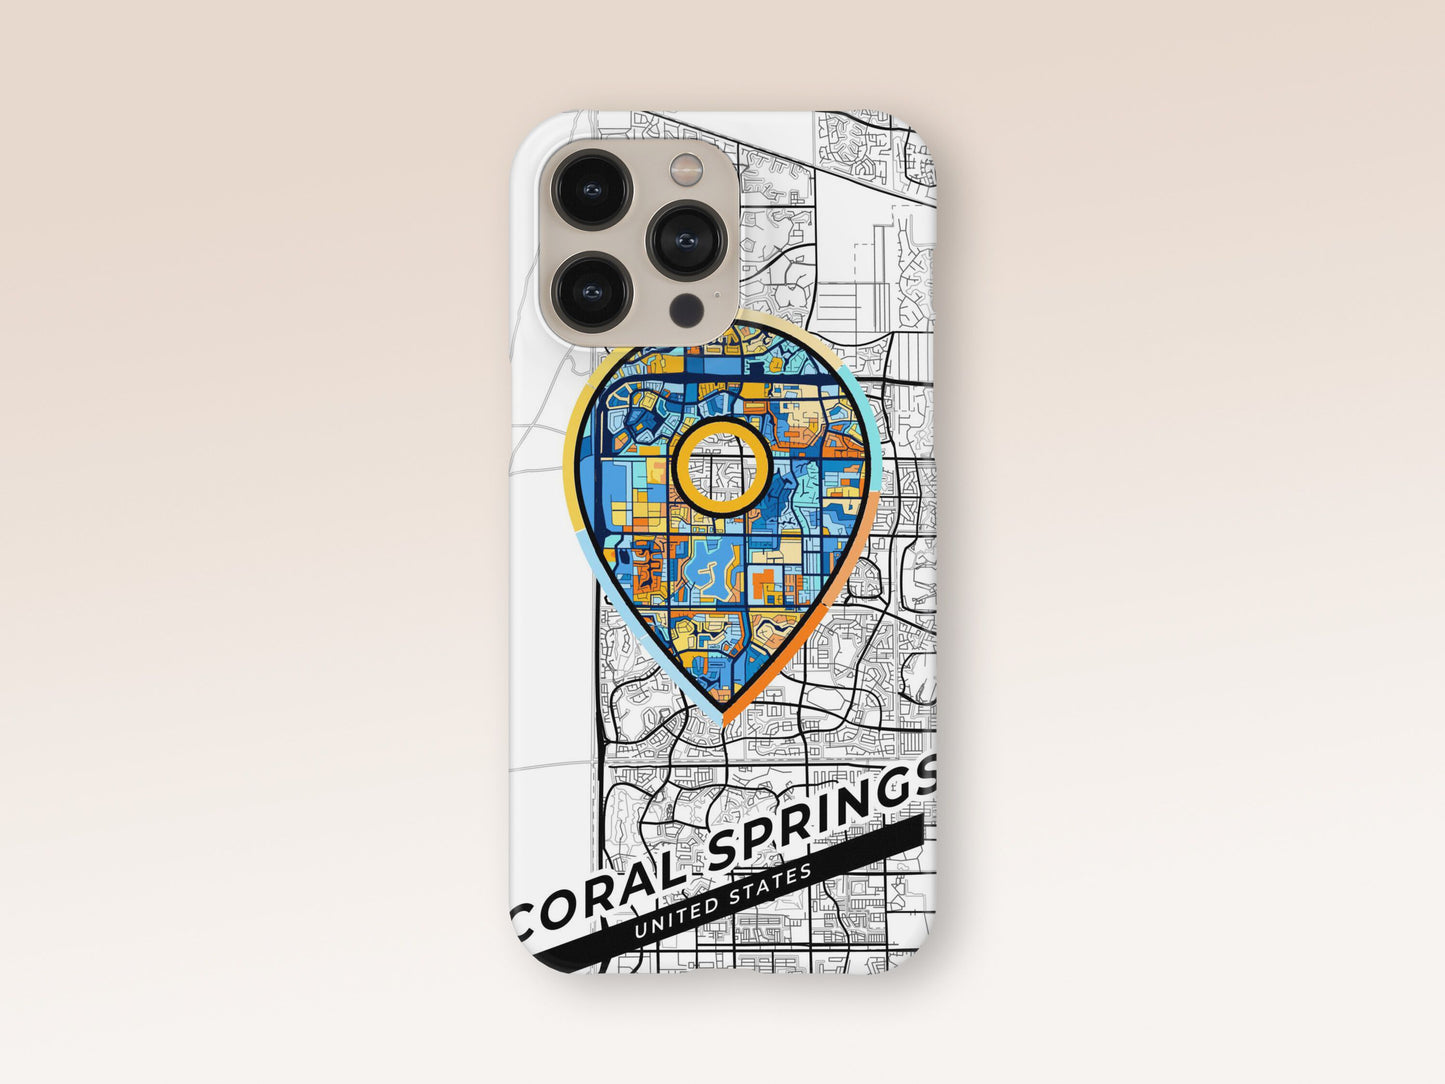 Coral Springs Florida slim phone case with colorful icon. Birthday, wedding or housewarming gift. Couple match cases. 1